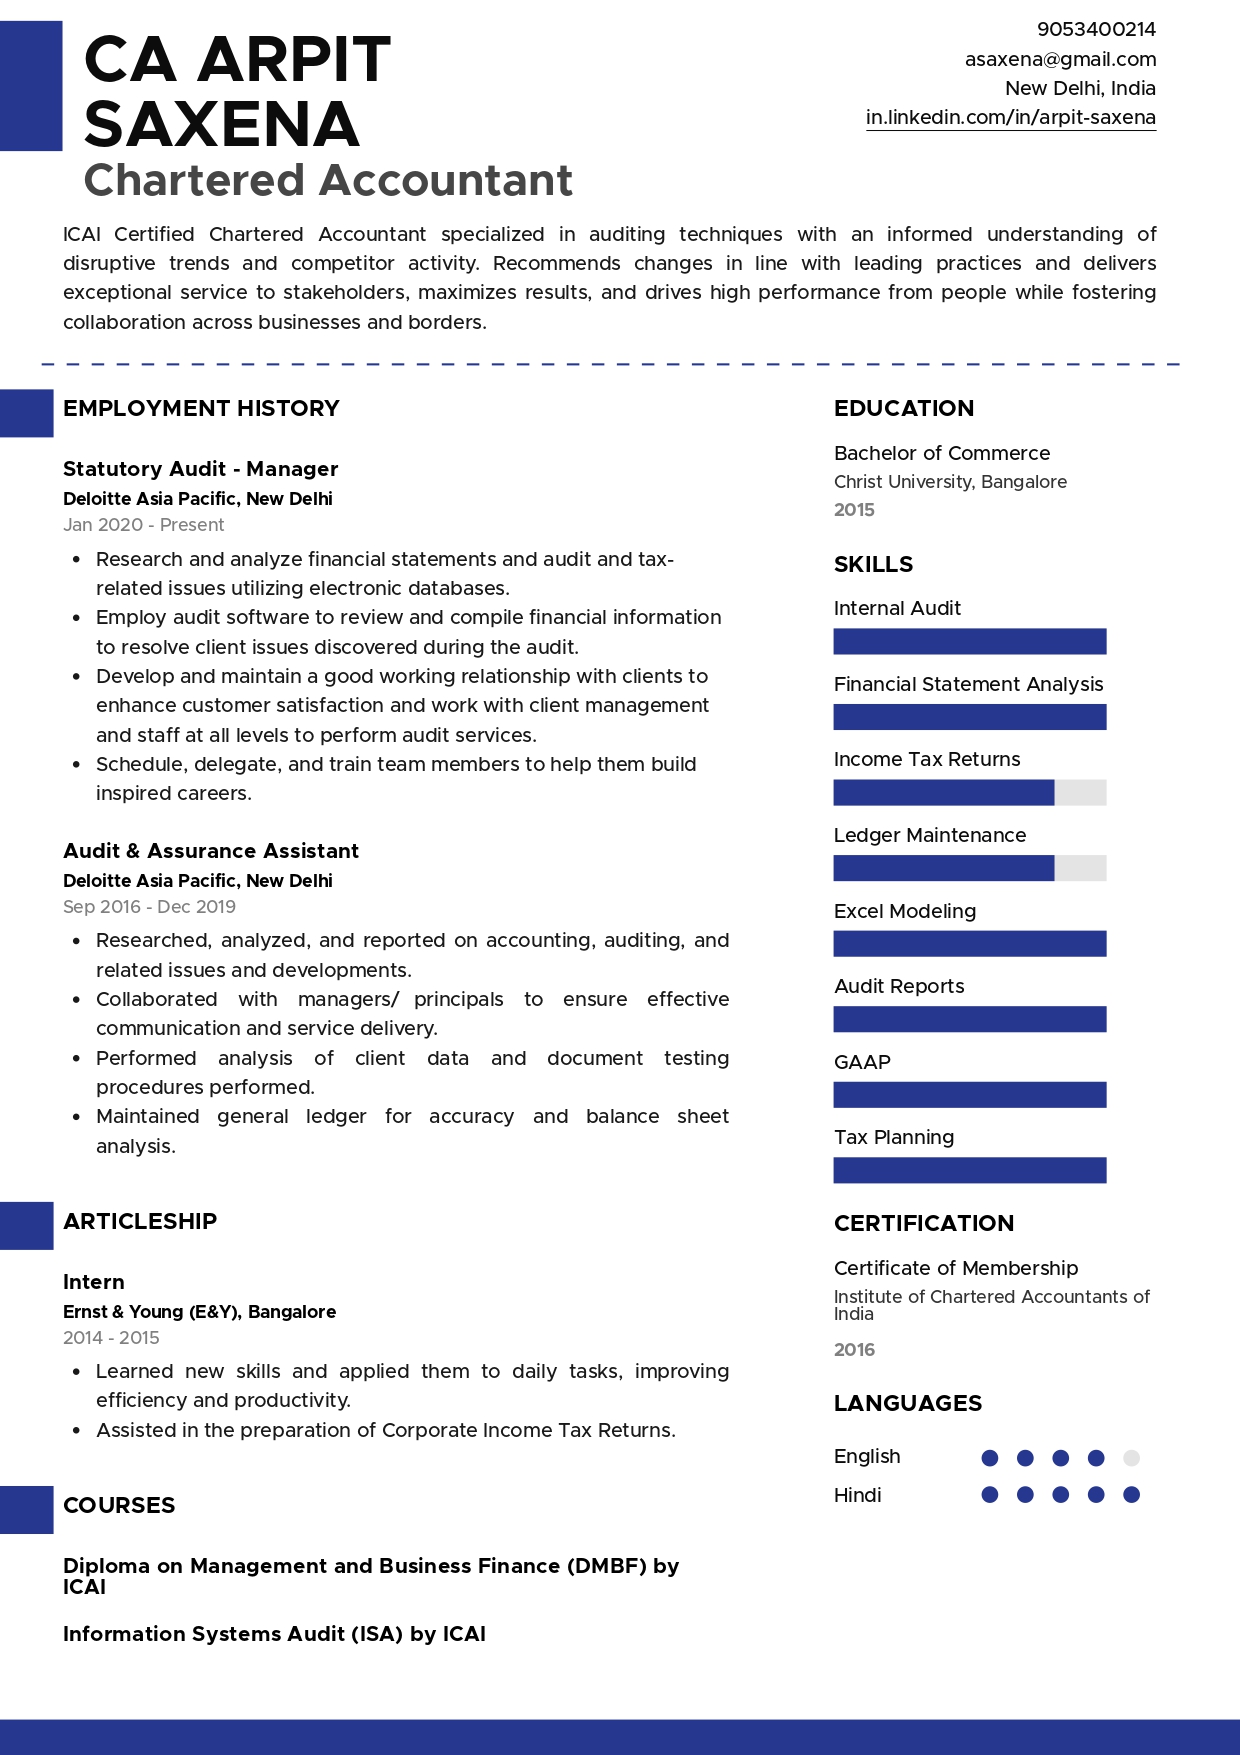 Resume of Chartered Accountant (CA)